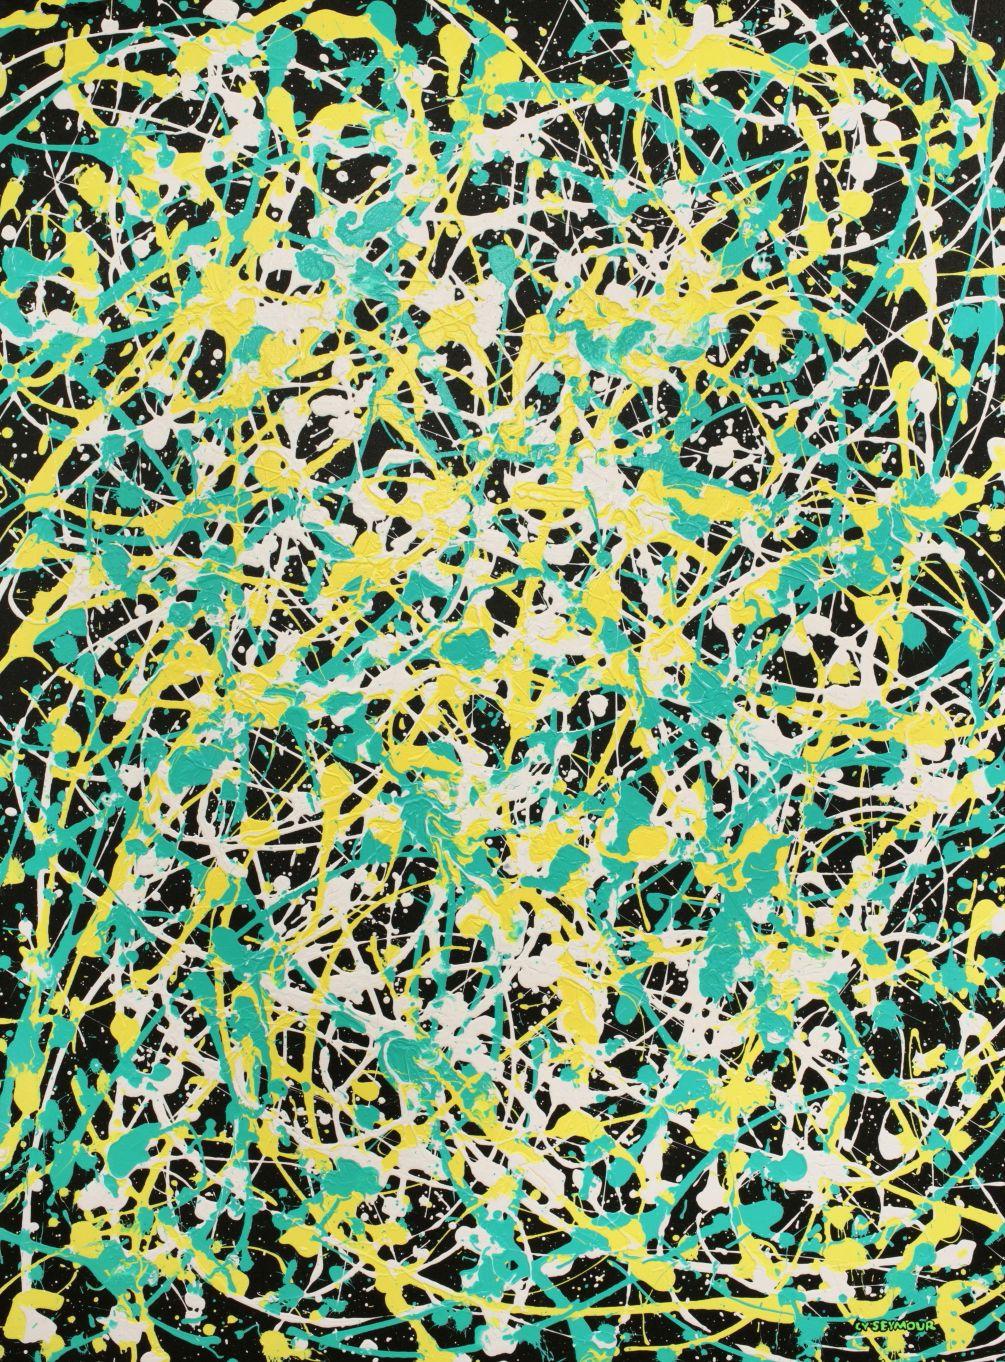 Minty Green, Limoncello Yellow and White on Black.  Can be presented horizontally or vertically. :: Painting :: Abstract Expressionism :: This piece comes with an official certificate of authenticity signed by the artist :: Ready to Hang: Yes ::